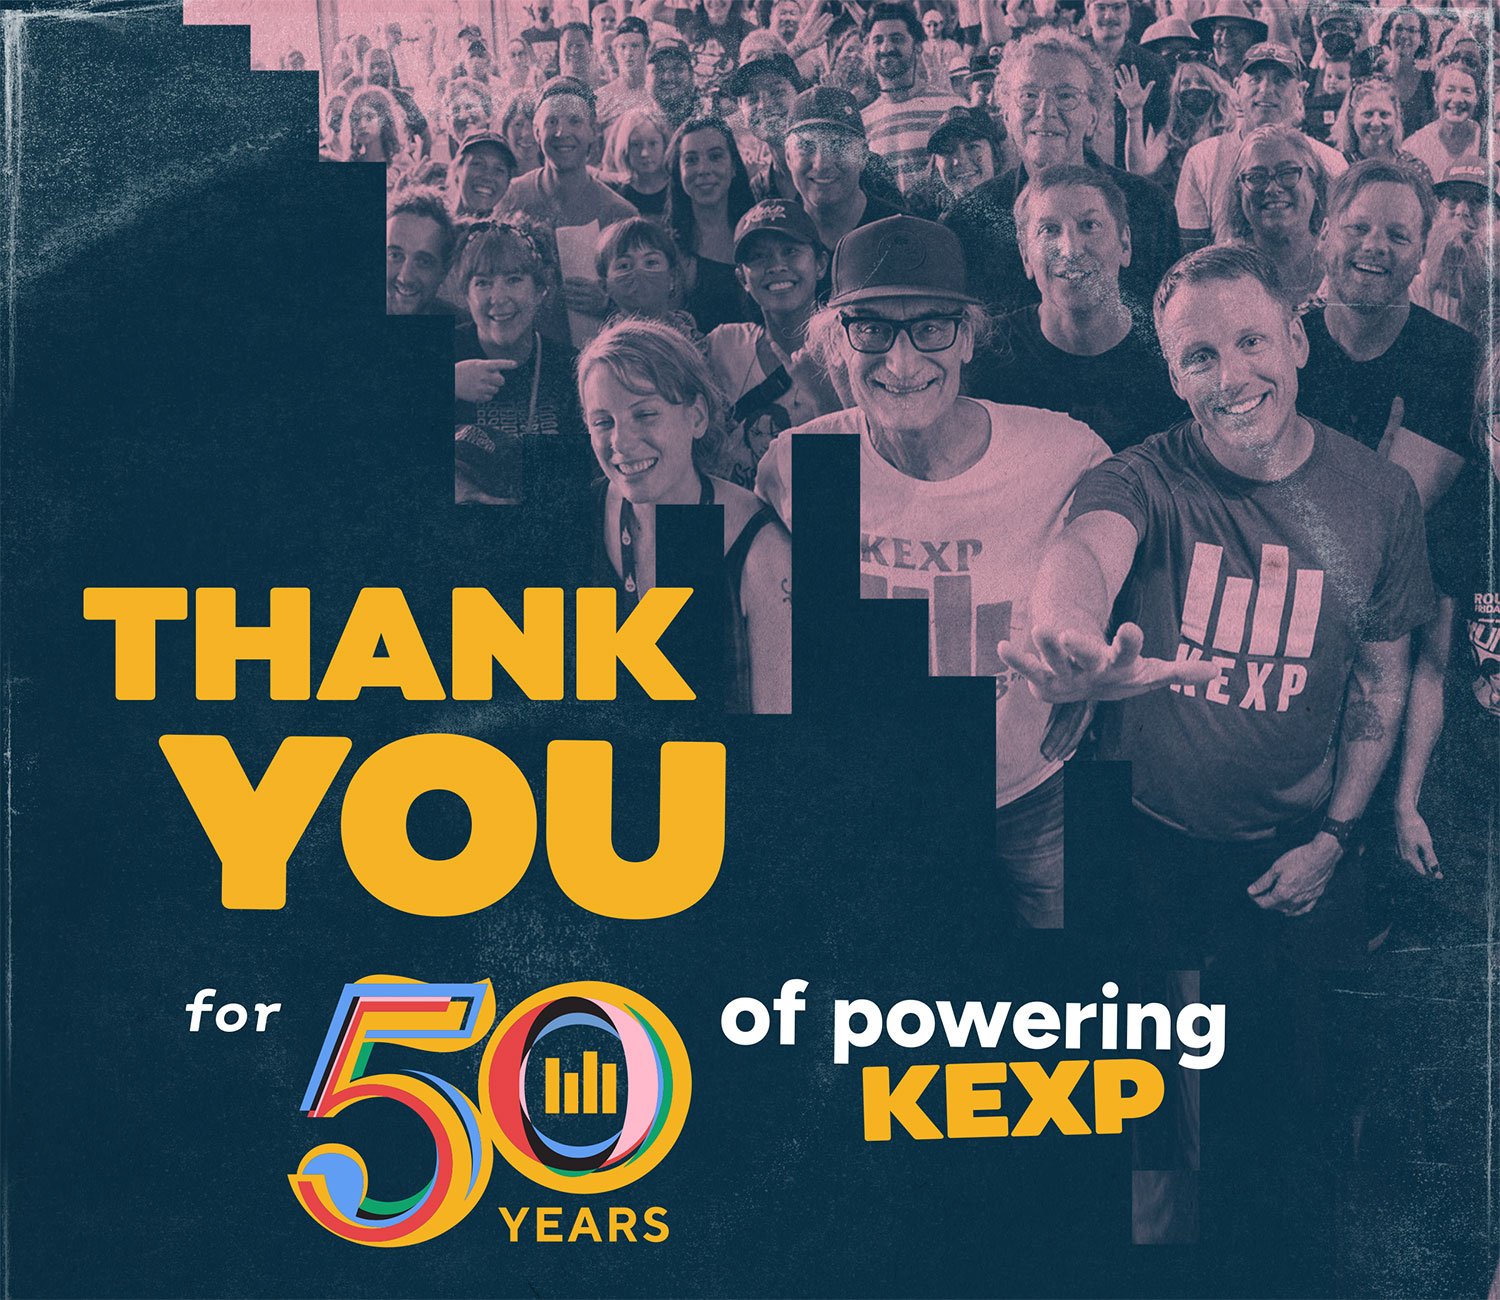 Large group photo of many KEXP DJs and a crowd of KEXP50 attendees in the Gathering Space, smiling and waving at the camera. Text overlay reads "Thank You for 50 Years of Powering KEXP."